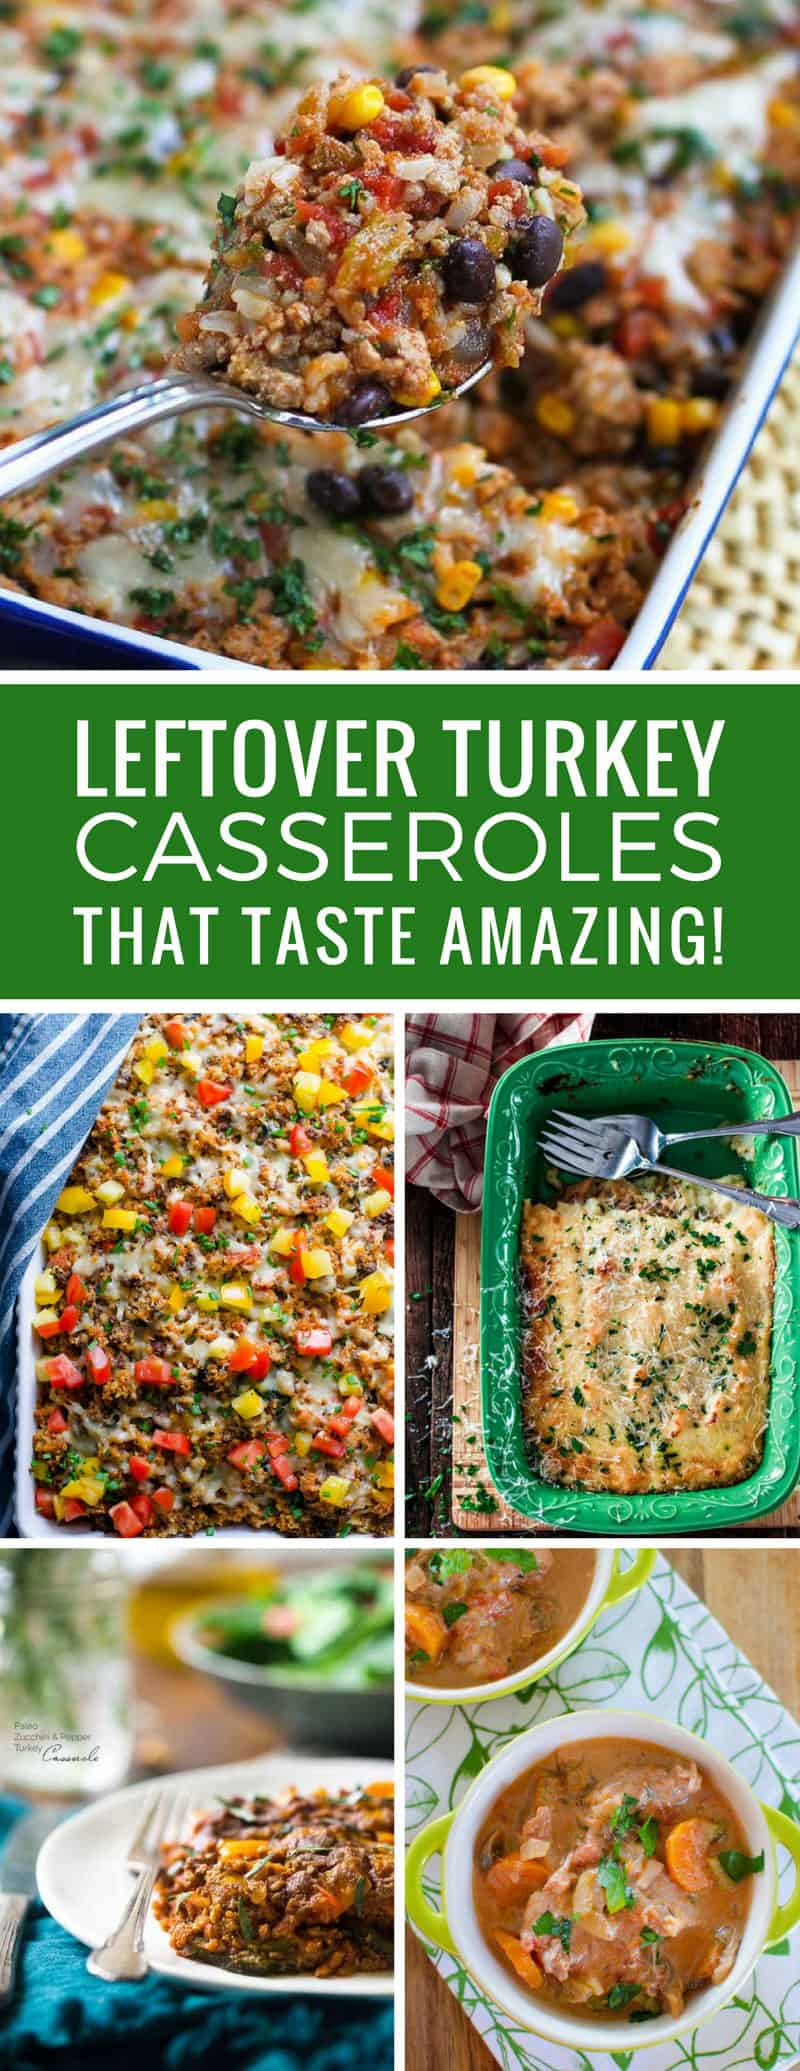 Loving these easy leftover turkey casserole recipes - you can never have too many new ways to eat leftovers and save money! Thanks for sharing!